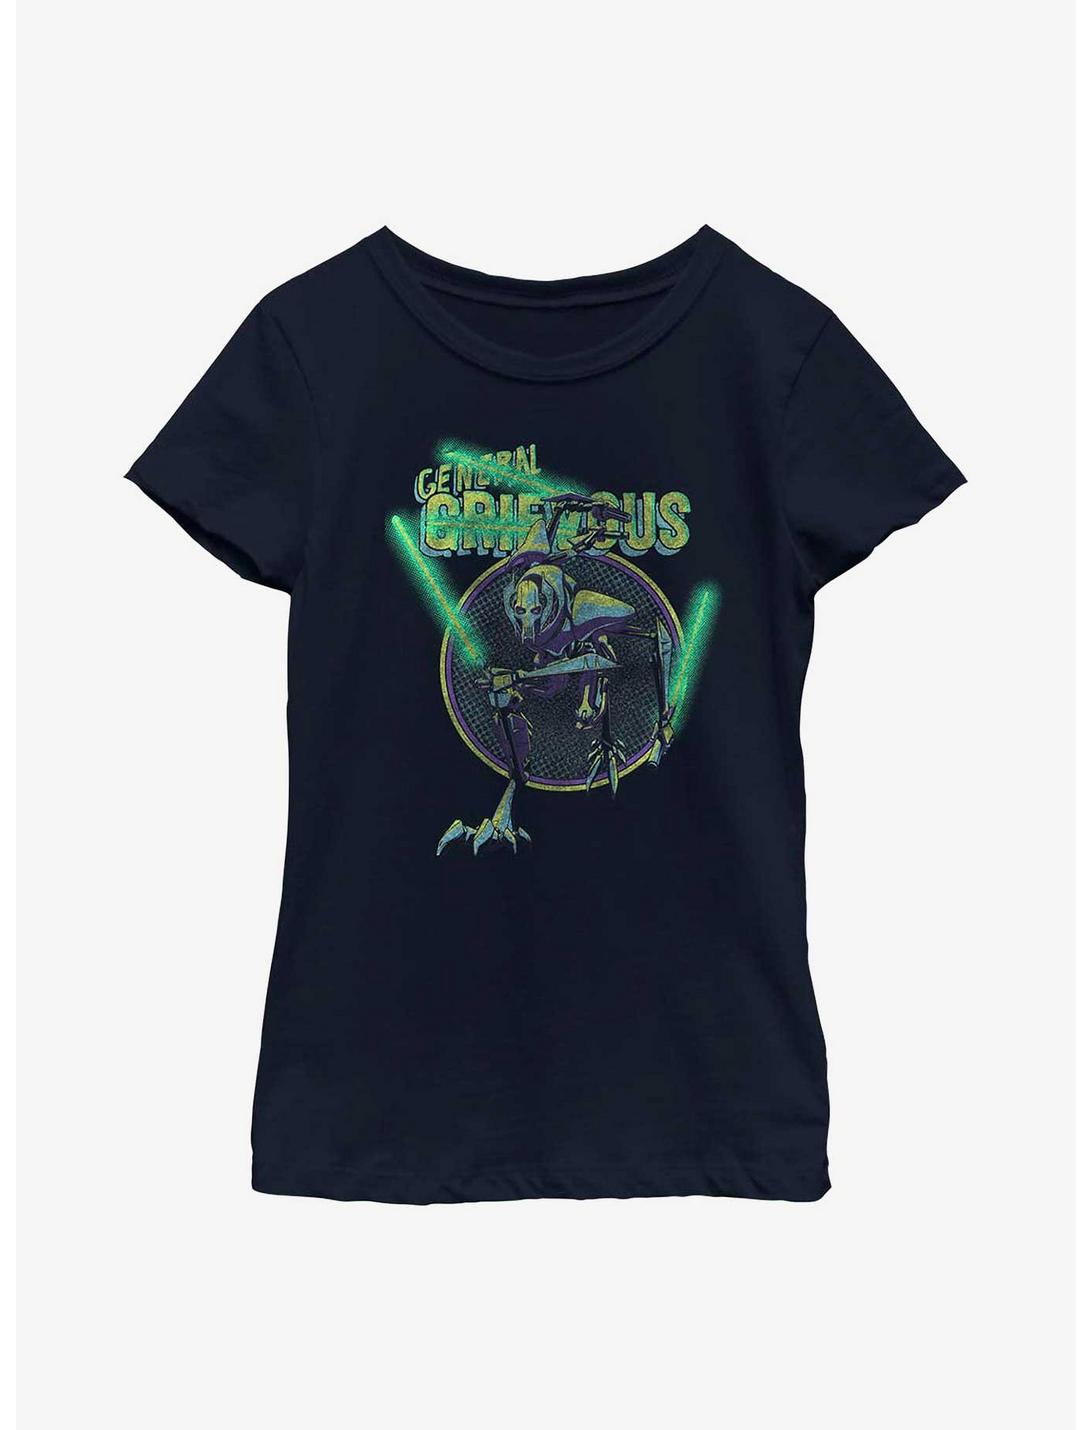 Star Wars General Grievous Youth Girls T-Shirt, NAVY, hi-res